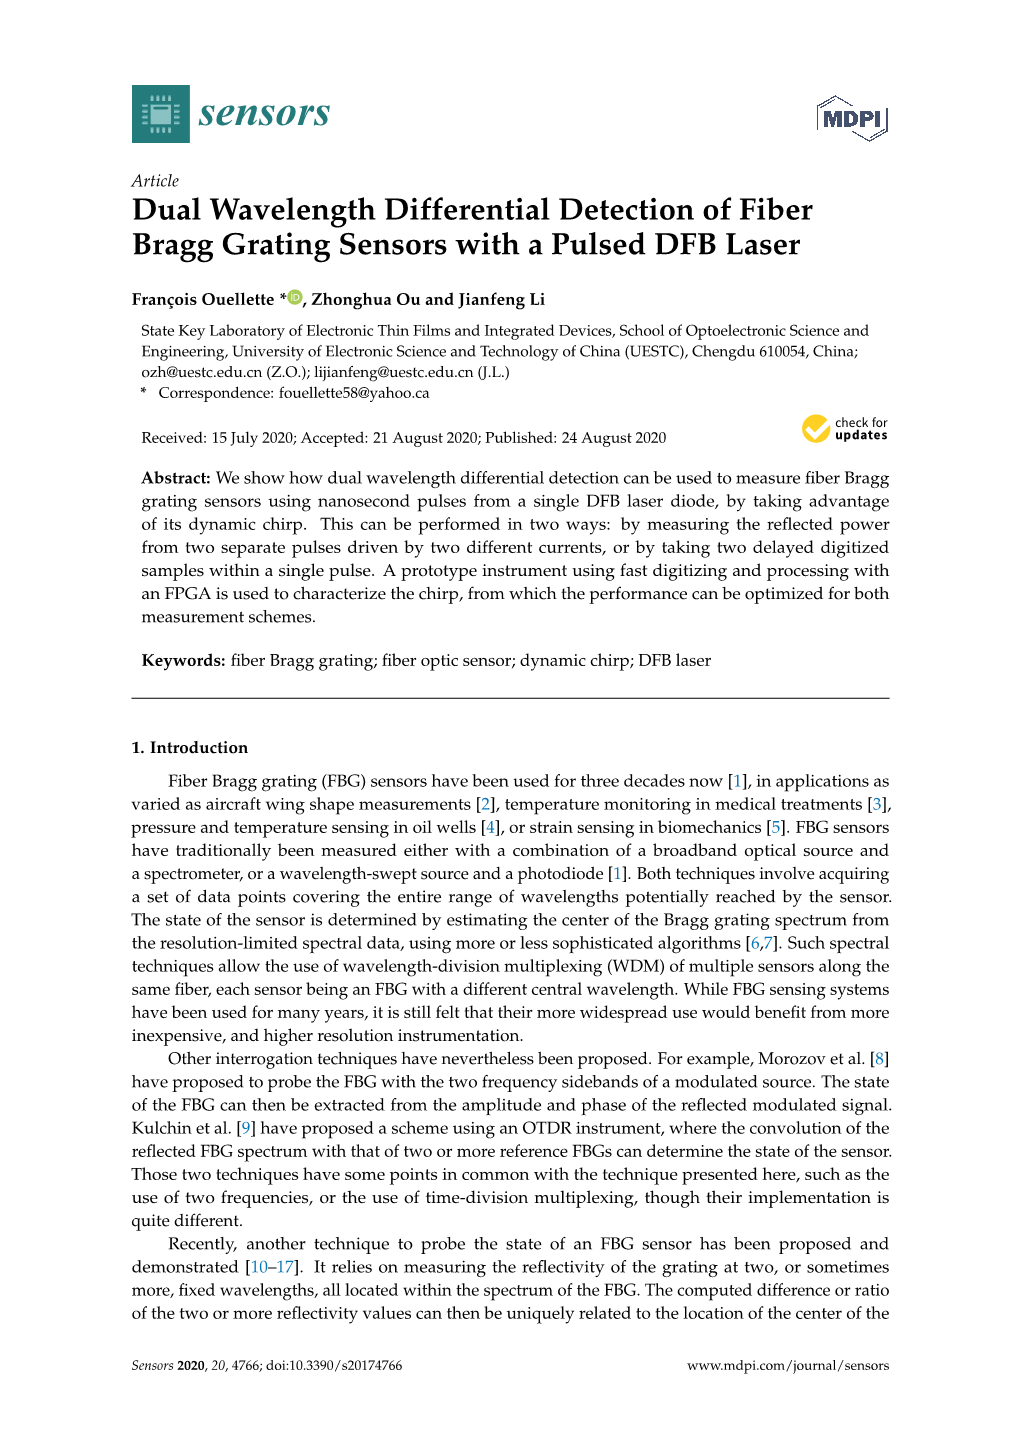 Dual Wavelength Differential Detection of Fiber Bragg Grating Sensors with a Pulsed DFB Laser